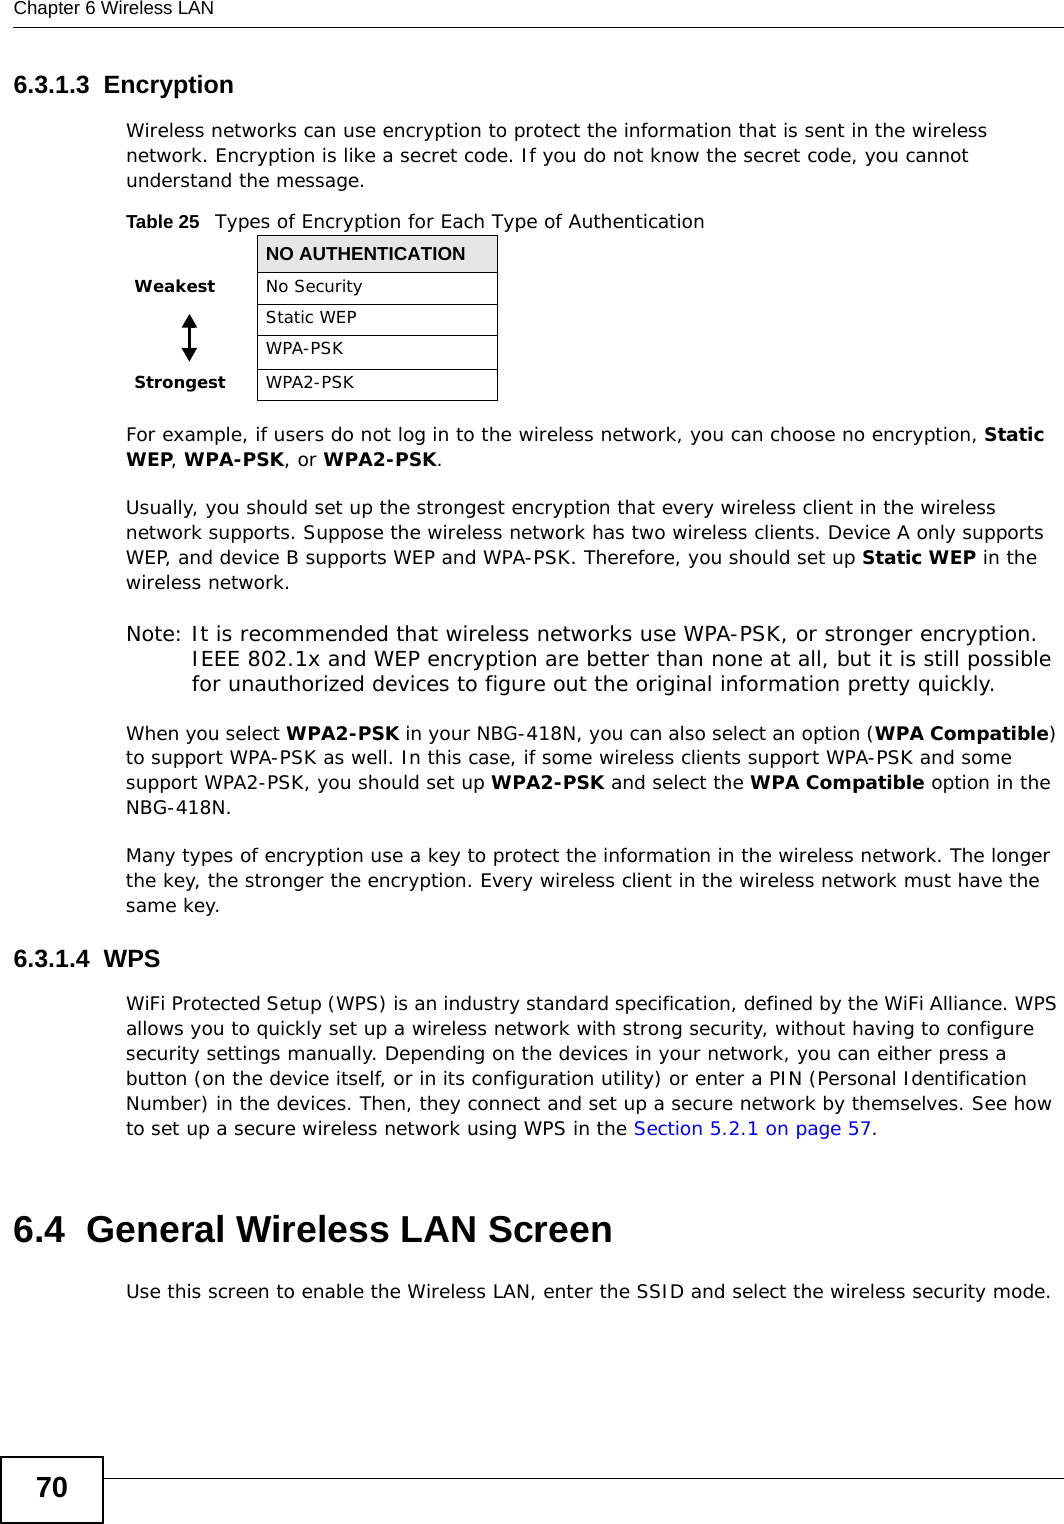 Chapter 6 Wireless LAN706.3.1.3  EncryptionWireless networks can use encryption to protect the information that is sent in the wireless network. Encryption is like a secret code. If you do not know the secret code, you cannot understand the message.For example, if users do not log in to the wireless network, you can choose no encryption, Static WEP, WPA-PSK, or WPA2-PSK.Usually, you should set up the strongest encryption that every wireless client in the wireless network supports. Suppose the wireless network has two wireless clients. Device A only supports WEP, and device B supports WEP and WPA-PSK. Therefore, you should set up Static WEP in the wireless network.Note: It is recommended that wireless networks use WPA-PSK, or stronger encryption. IEEE 802.1x and WEP encryption are better than none at all, but it is still possible for unauthorized devices to figure out the original information pretty quickly.When you select WPA2-PSK in your NBG-418N, you can also select an option (WPA Compatible) to support WPA-PSK as well. In this case, if some wireless clients support WPA-PSK and some support WPA2-PSK, you should set up WPA2-PSK and select the WPA Compatible option in the NBG-418N.Many types of encryption use a key to protect the information in the wireless network. The longer the key, the stronger the encryption. Every wireless client in the wireless network must have the same key.6.3.1.4  WPSWiFi Protected Setup (WPS) is an industry standard specification, defined by the WiFi Alliance. WPS allows you to quickly set up a wireless network with strong security, without having to configure security settings manually. Depending on the devices in your network, you can either press a button (on the device itself, or in its configuration utility) or enter a PIN (Personal Identification Number) in the devices. Then, they connect and set up a secure network by themselves. See how to set up a secure wireless network using WPS in the Section 5.2.1 on page 57. 6.4  General Wireless LAN Screen Use this screen to enable the Wireless LAN, enter the SSID and select the wireless security mode.Table 25   Types of Encryption for Each Type of AuthenticationNO AUTHENTICATIONWeakest No SecurityStatic WEPWPA-PSKStrongest WPA2-PSK